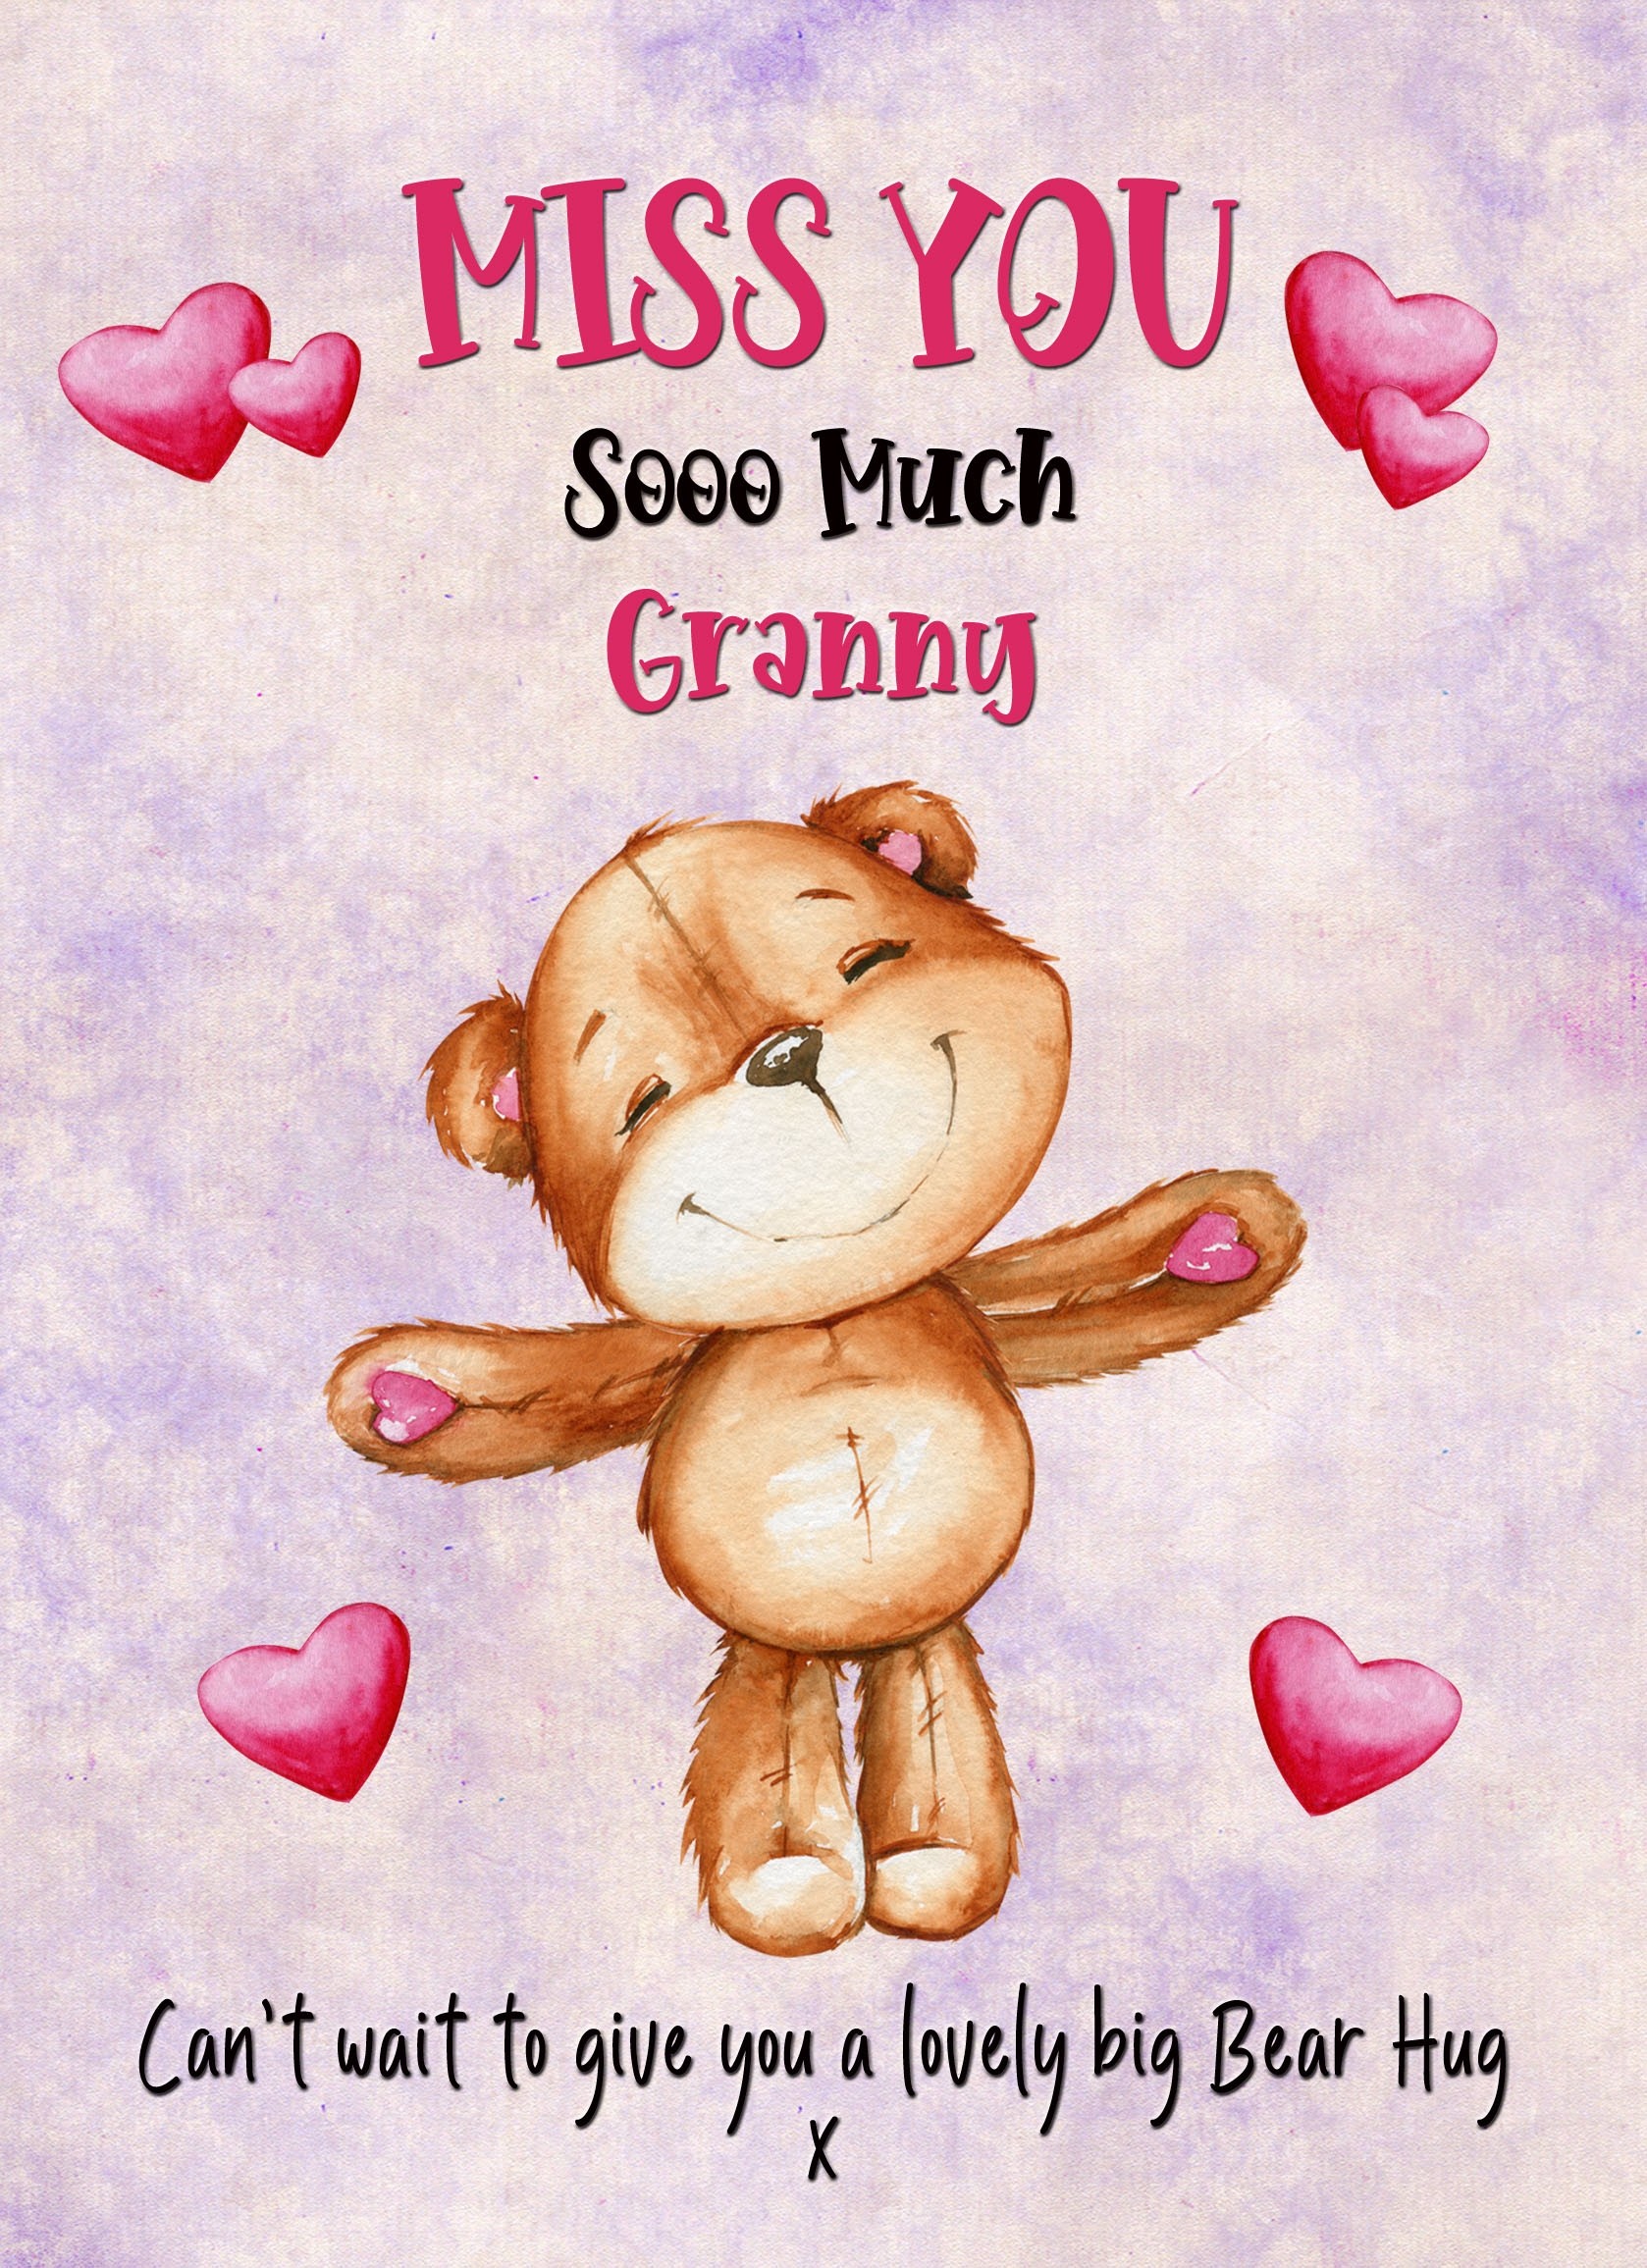 Missing You Card For Granny (Hearts)